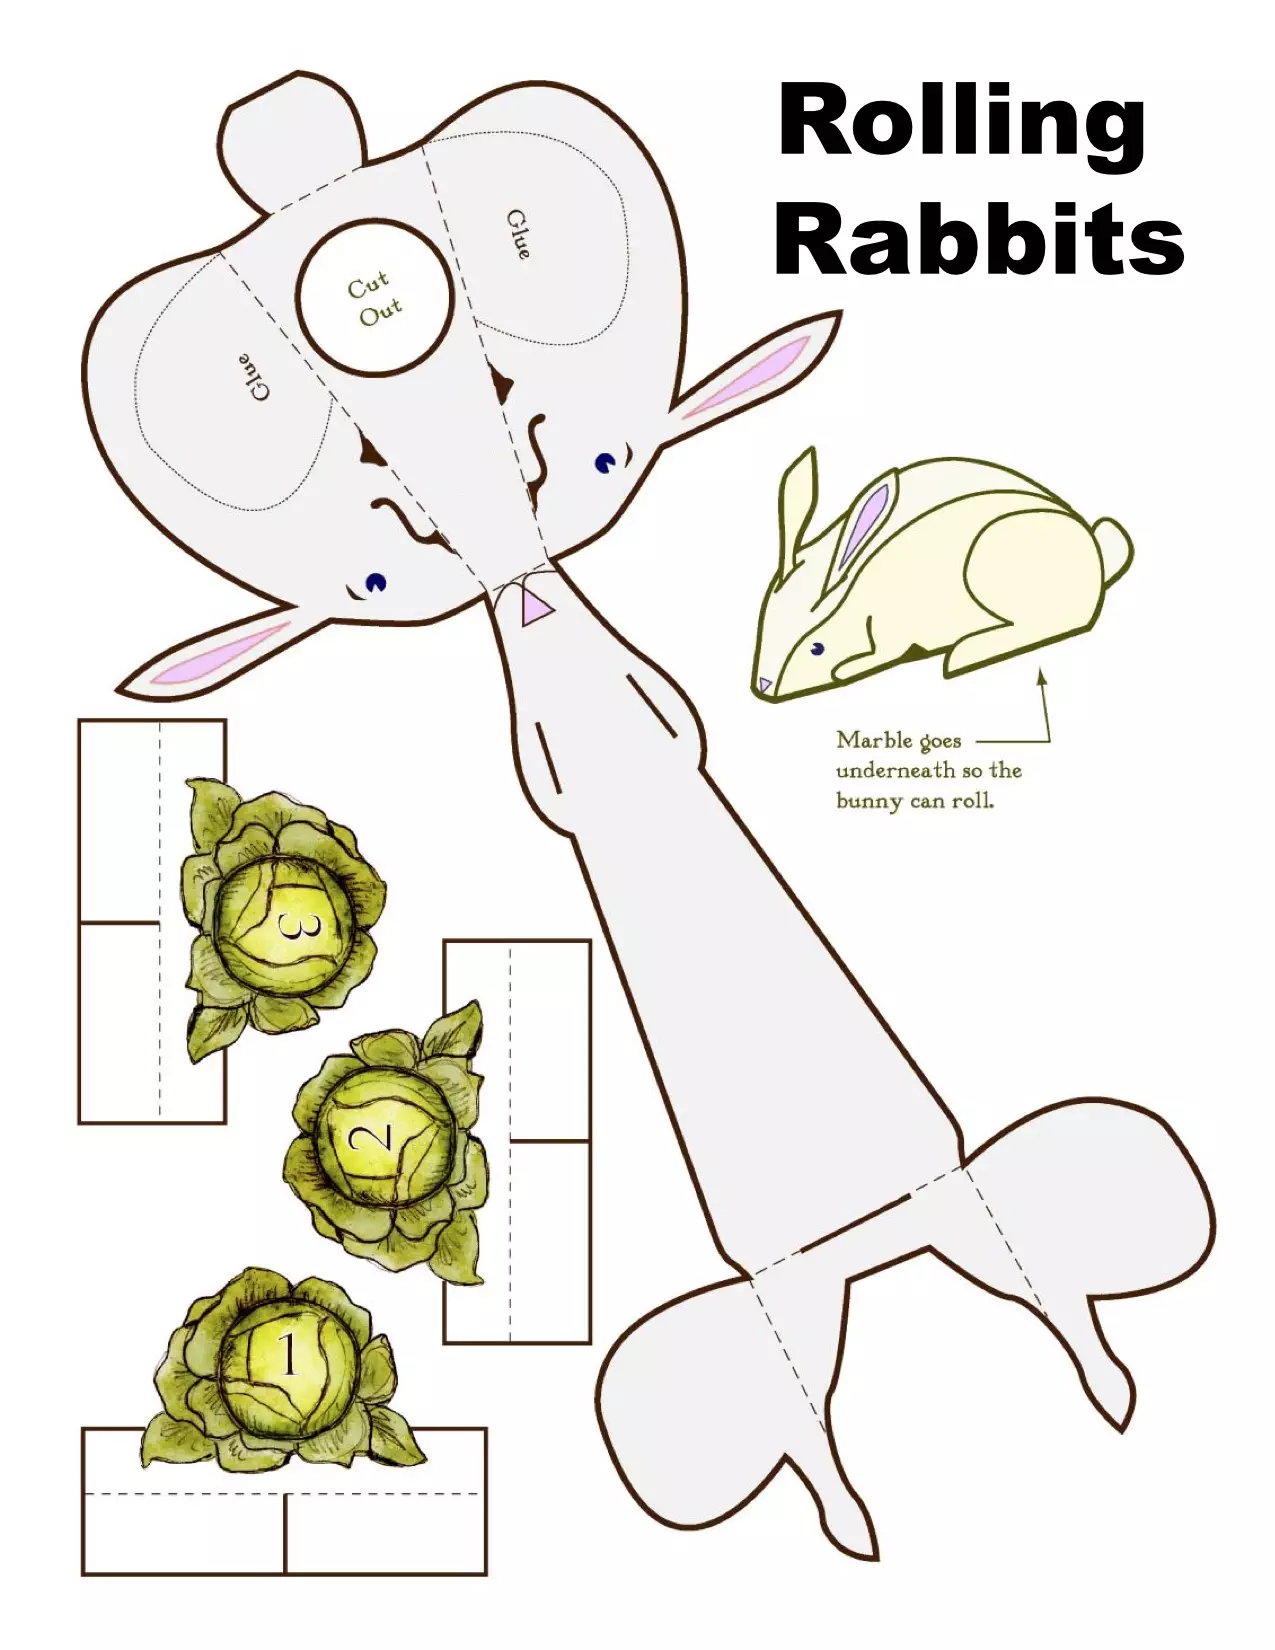 Rolling Rabbits Toys